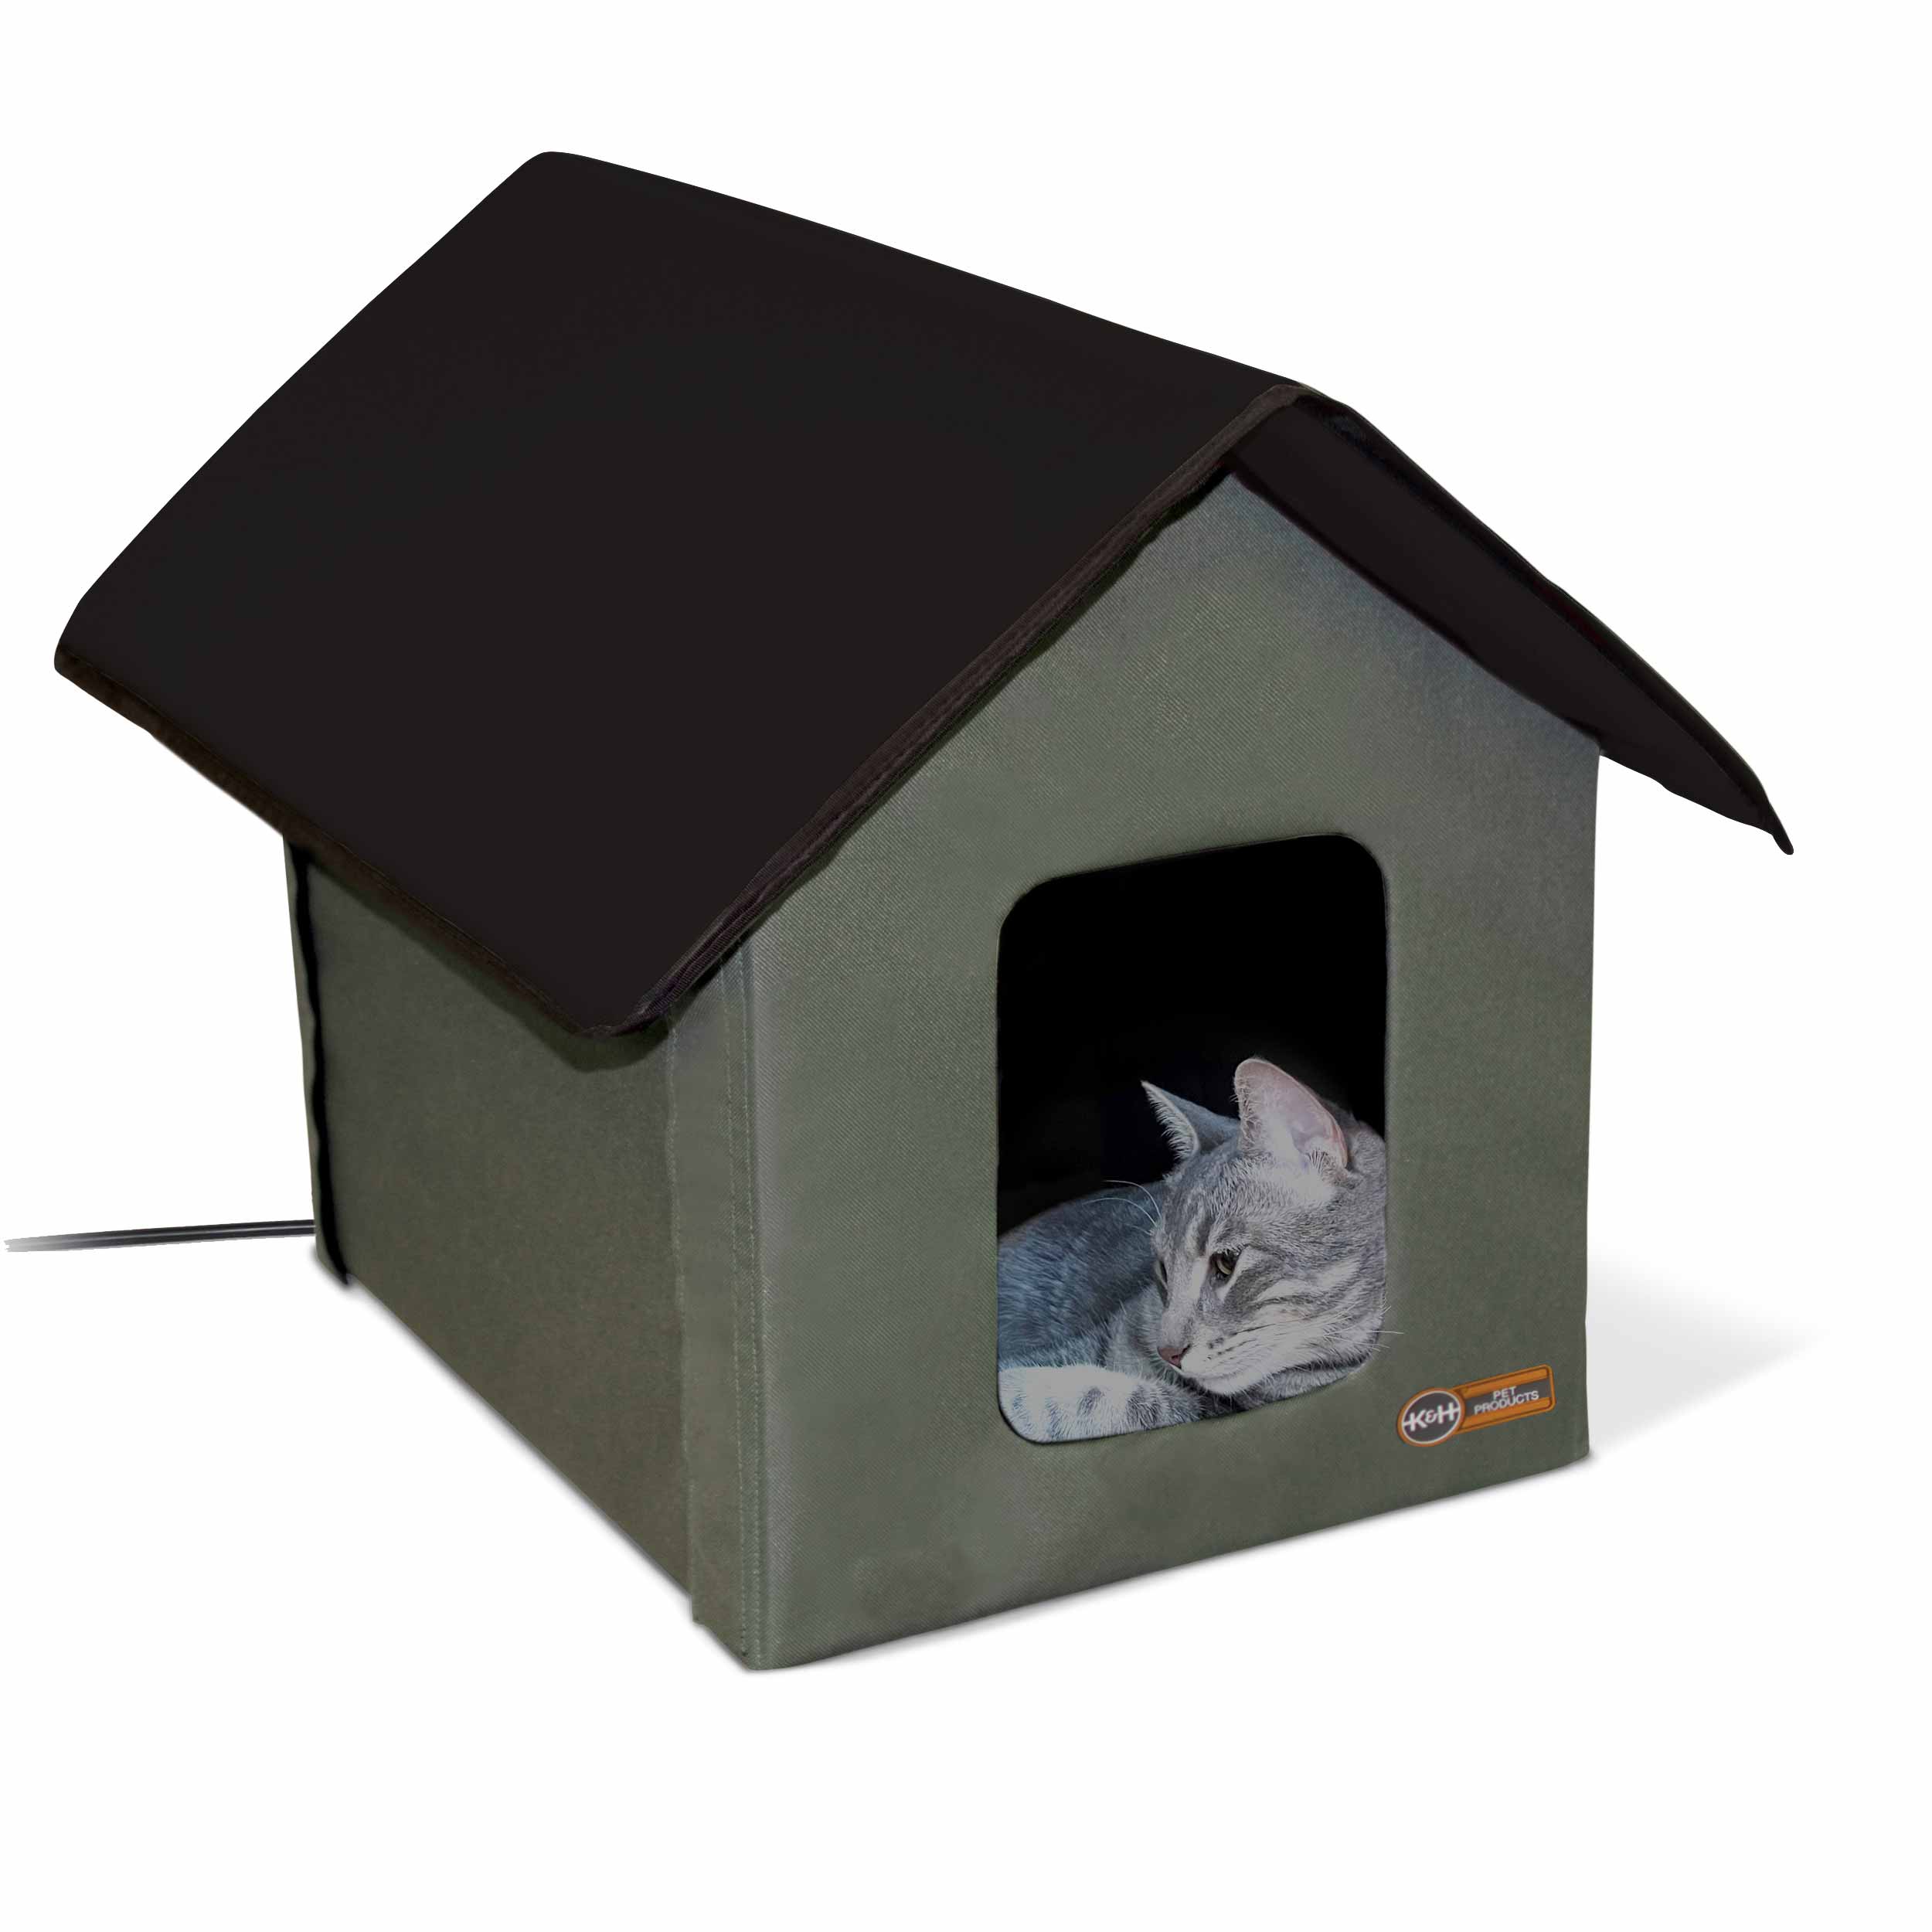 kh100546560 Outdoor Heated Kitty House Cat Shelter